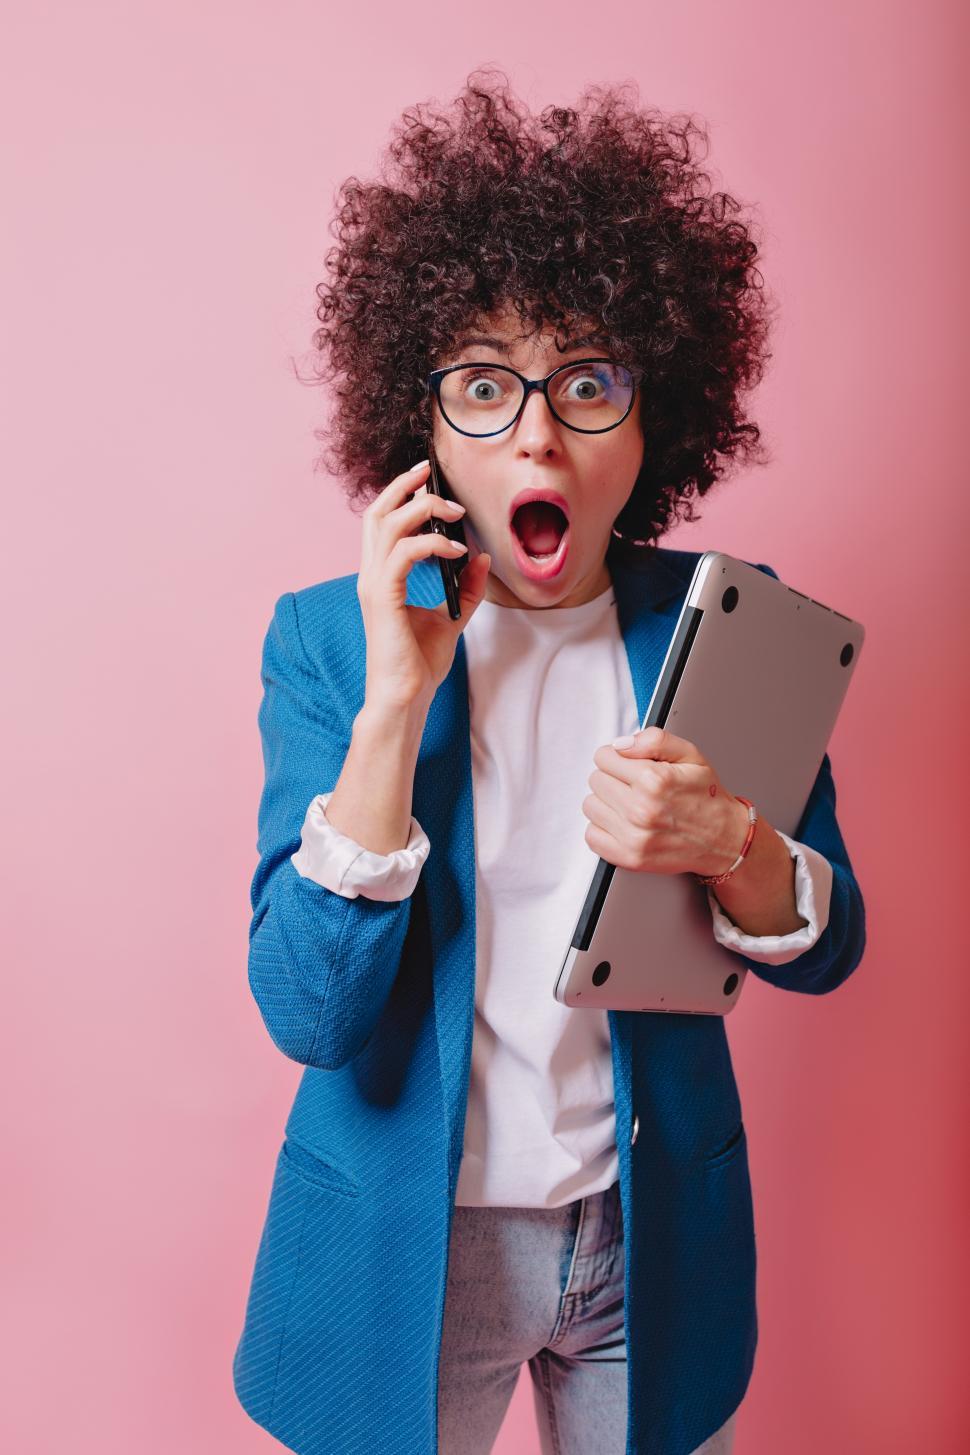 Download Free Stock Photo of Shocked woman on the phone 